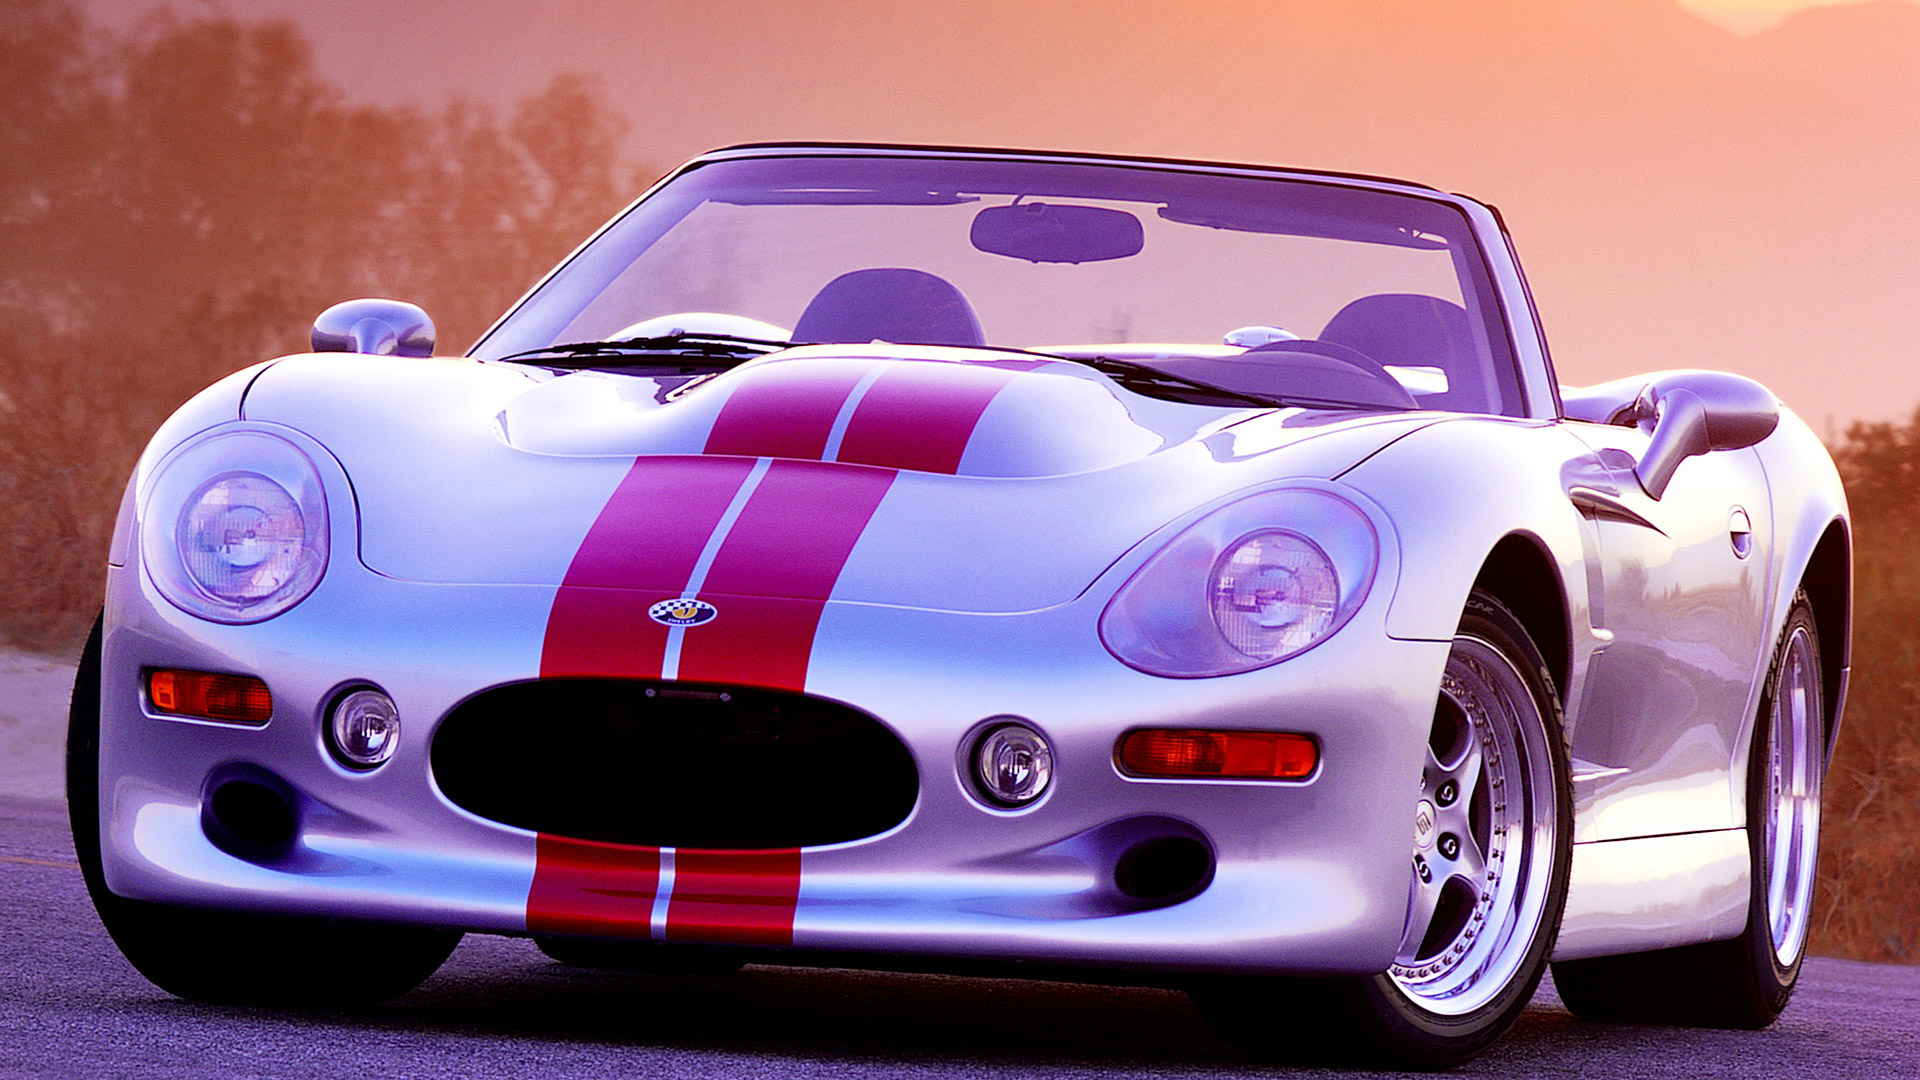  1999 Shelby Series 1 Wallpaper.